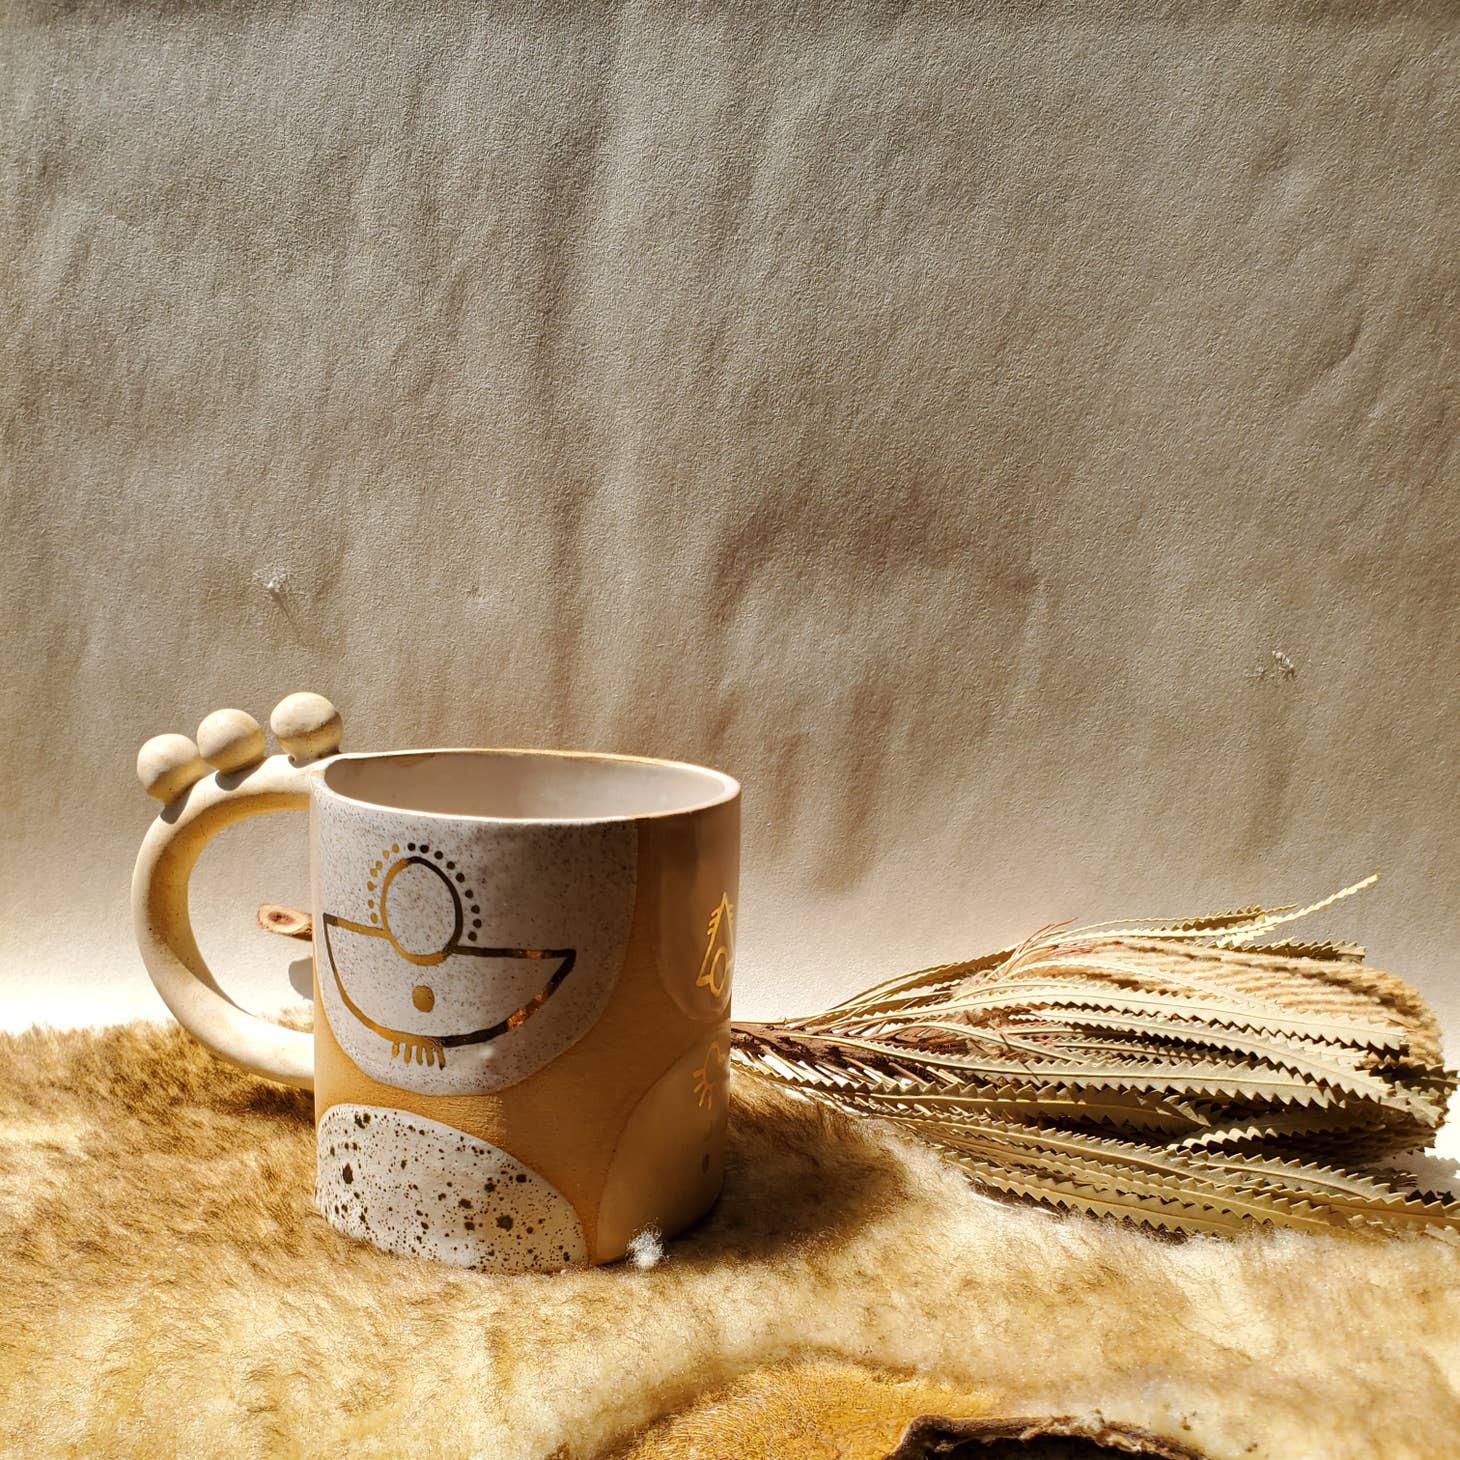 Handmade ceramic mug featuring unique glaze colors & ball accents atop a looped handle. Each is entirely one of a kind, all including gold luster to help you shine all day long. Handmade by Curious Clay in Virginia.